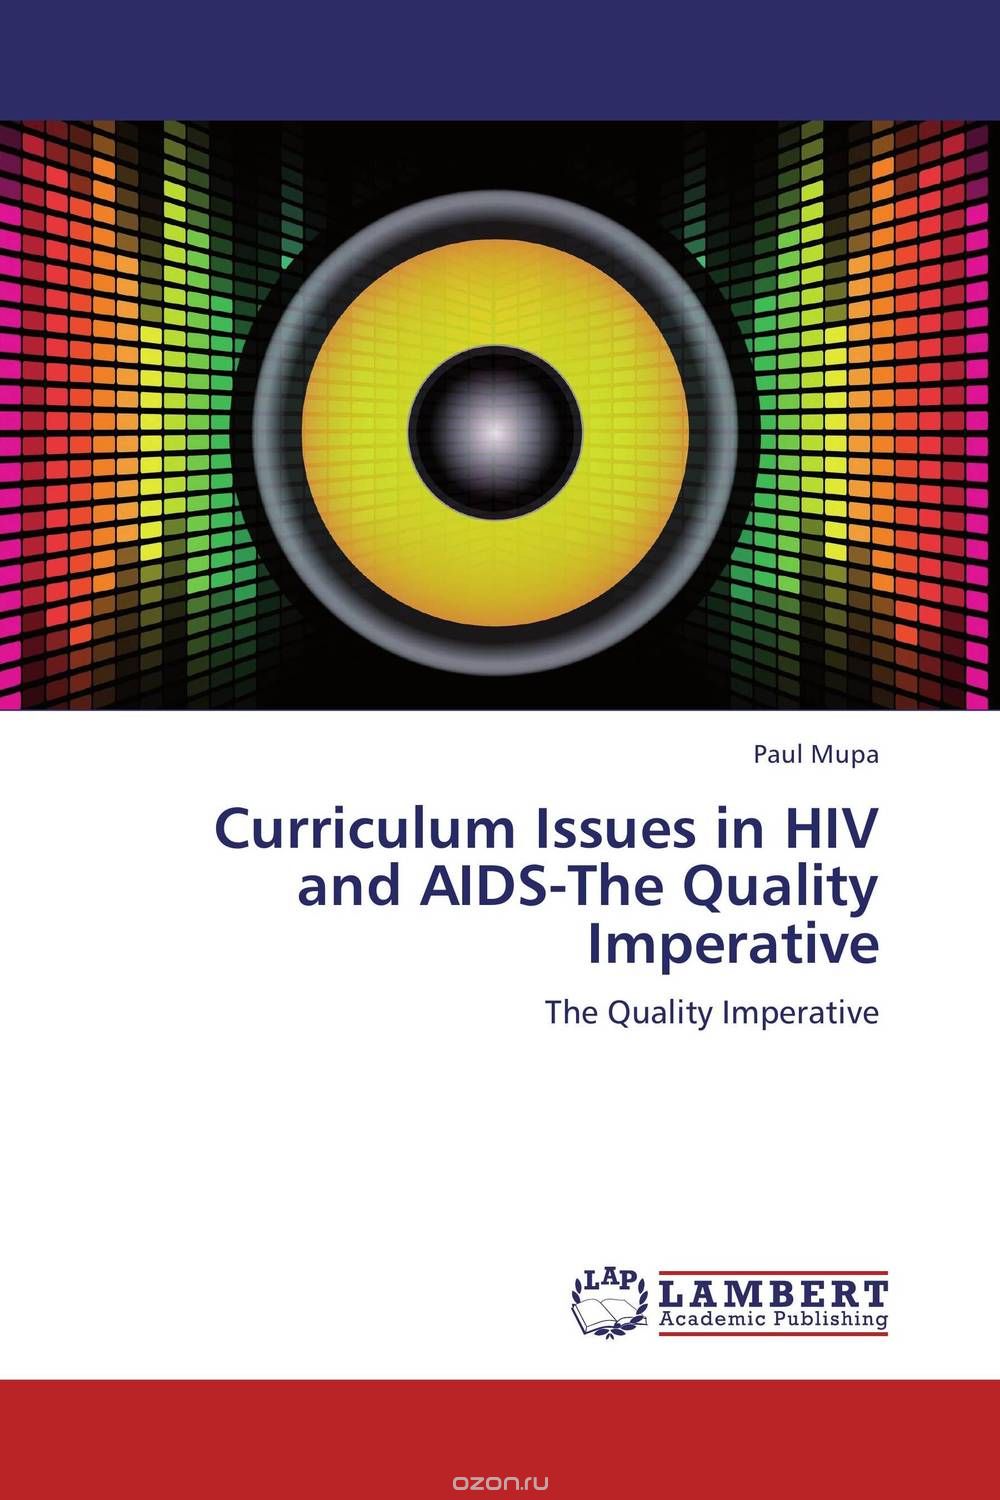 Скачать книгу "Curriculum Issues in HIV and AIDS-The Quality Imperative"